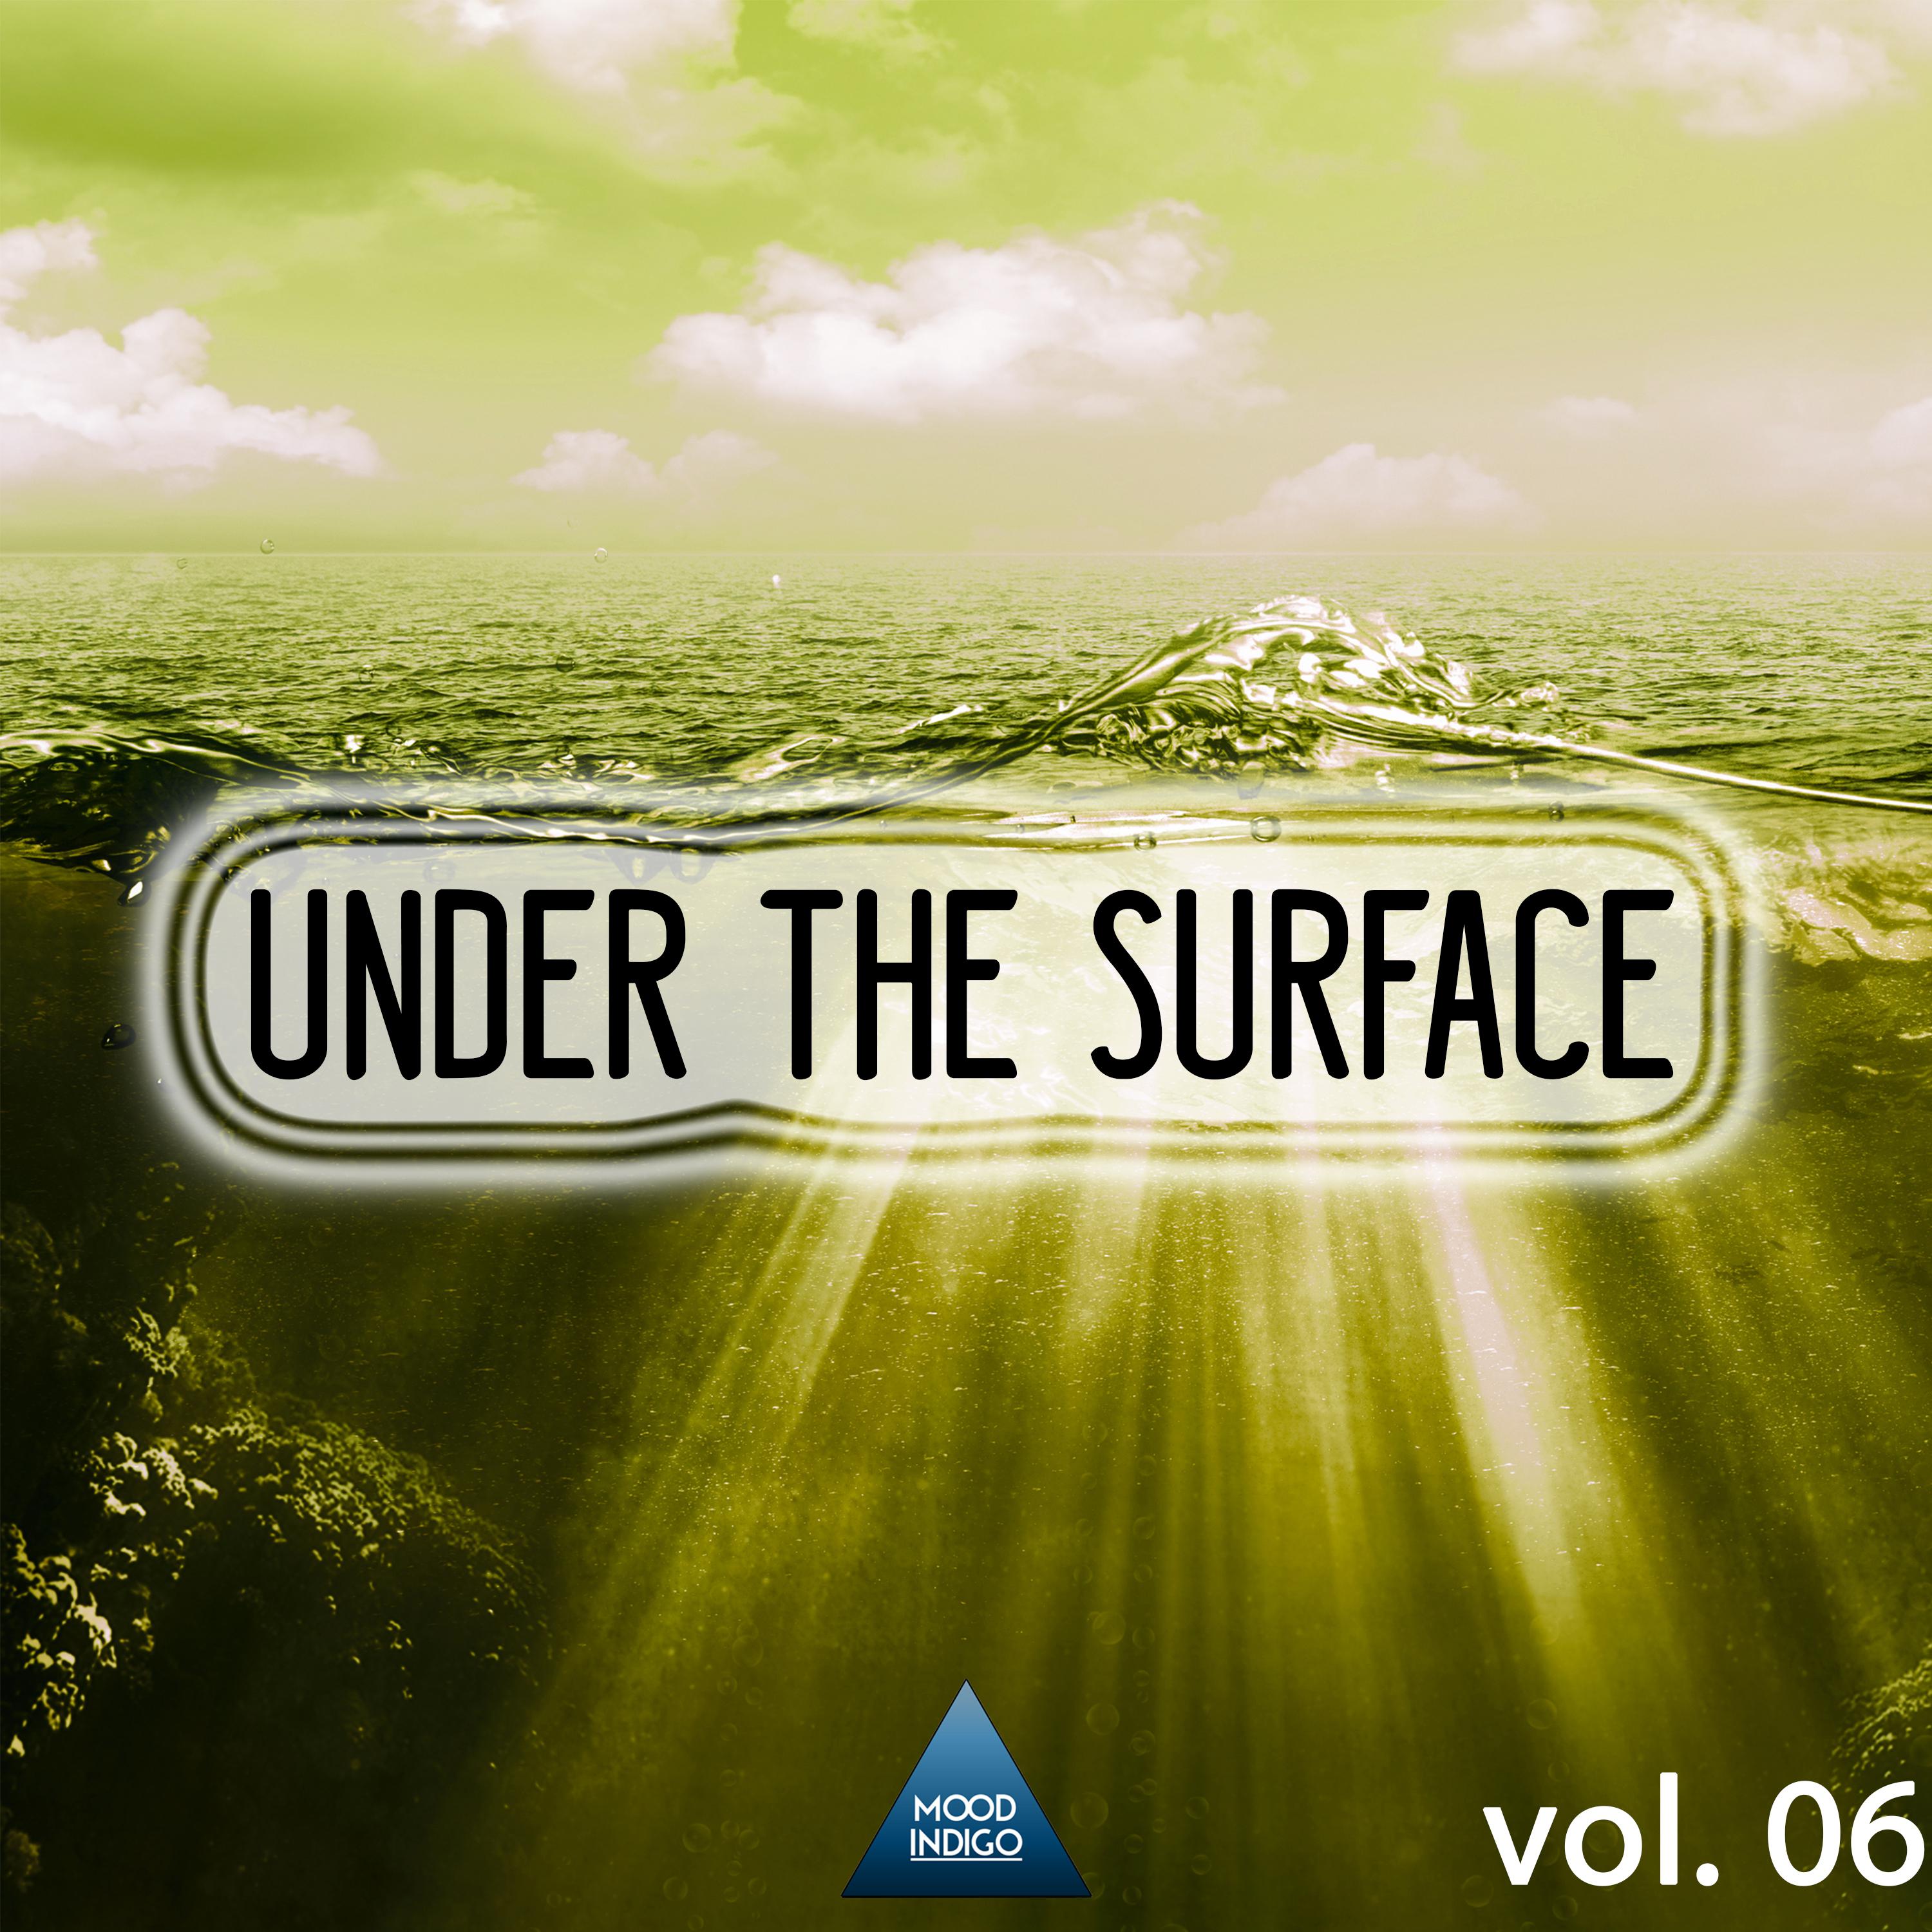 Under the Surface, Vol. 06